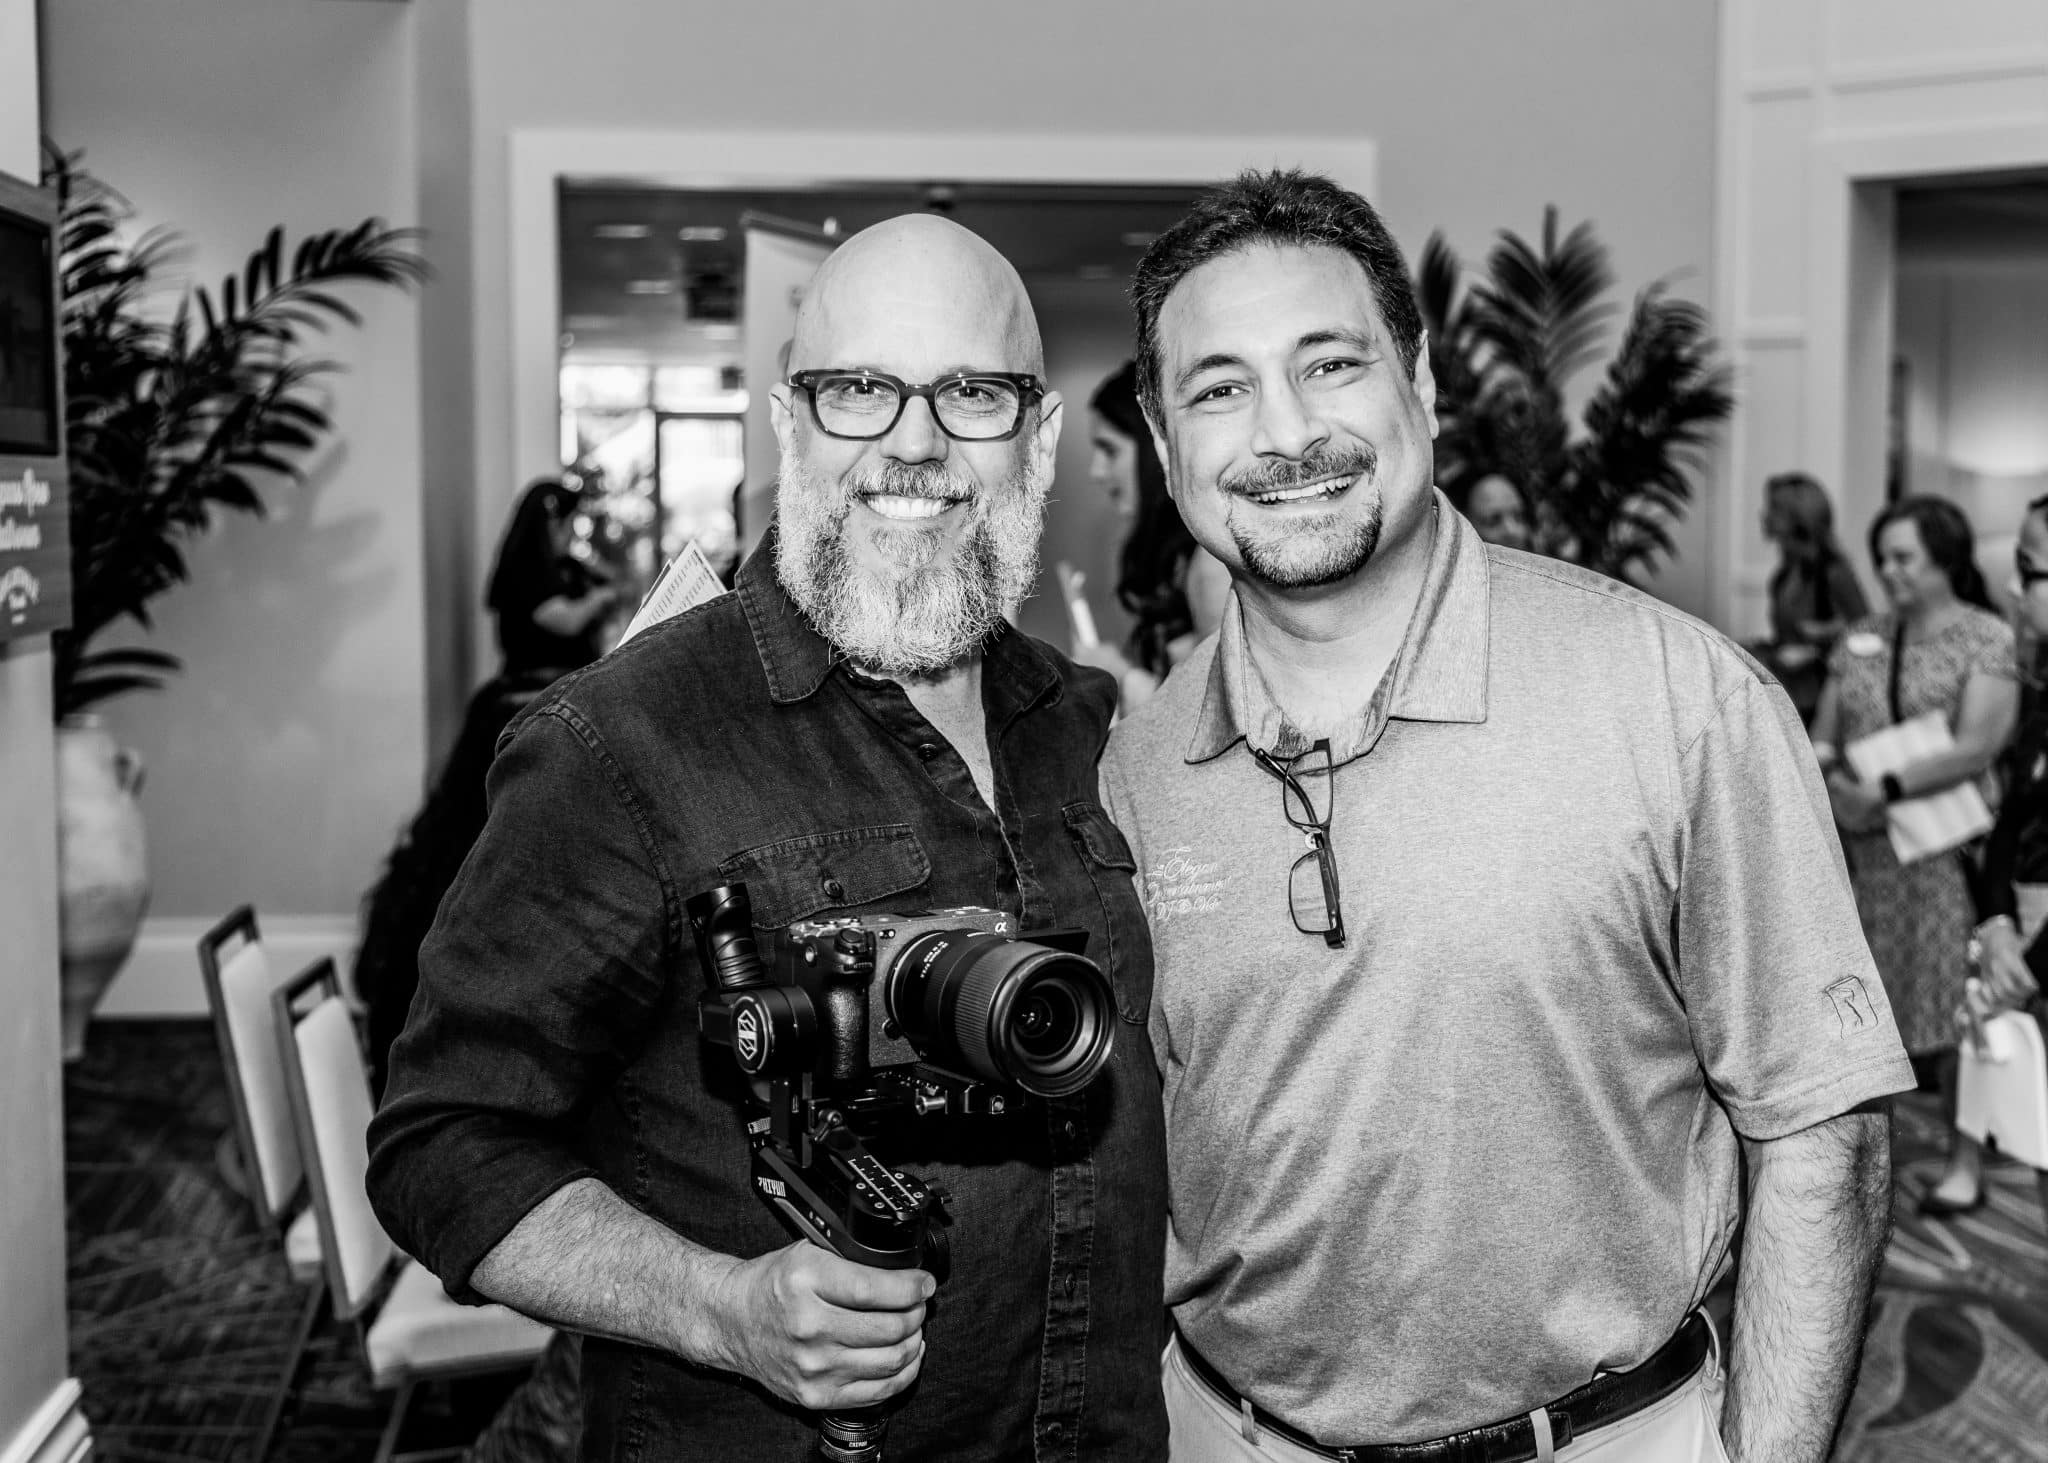 black and white image of two men standing together smiling for a picture while one holds a camera